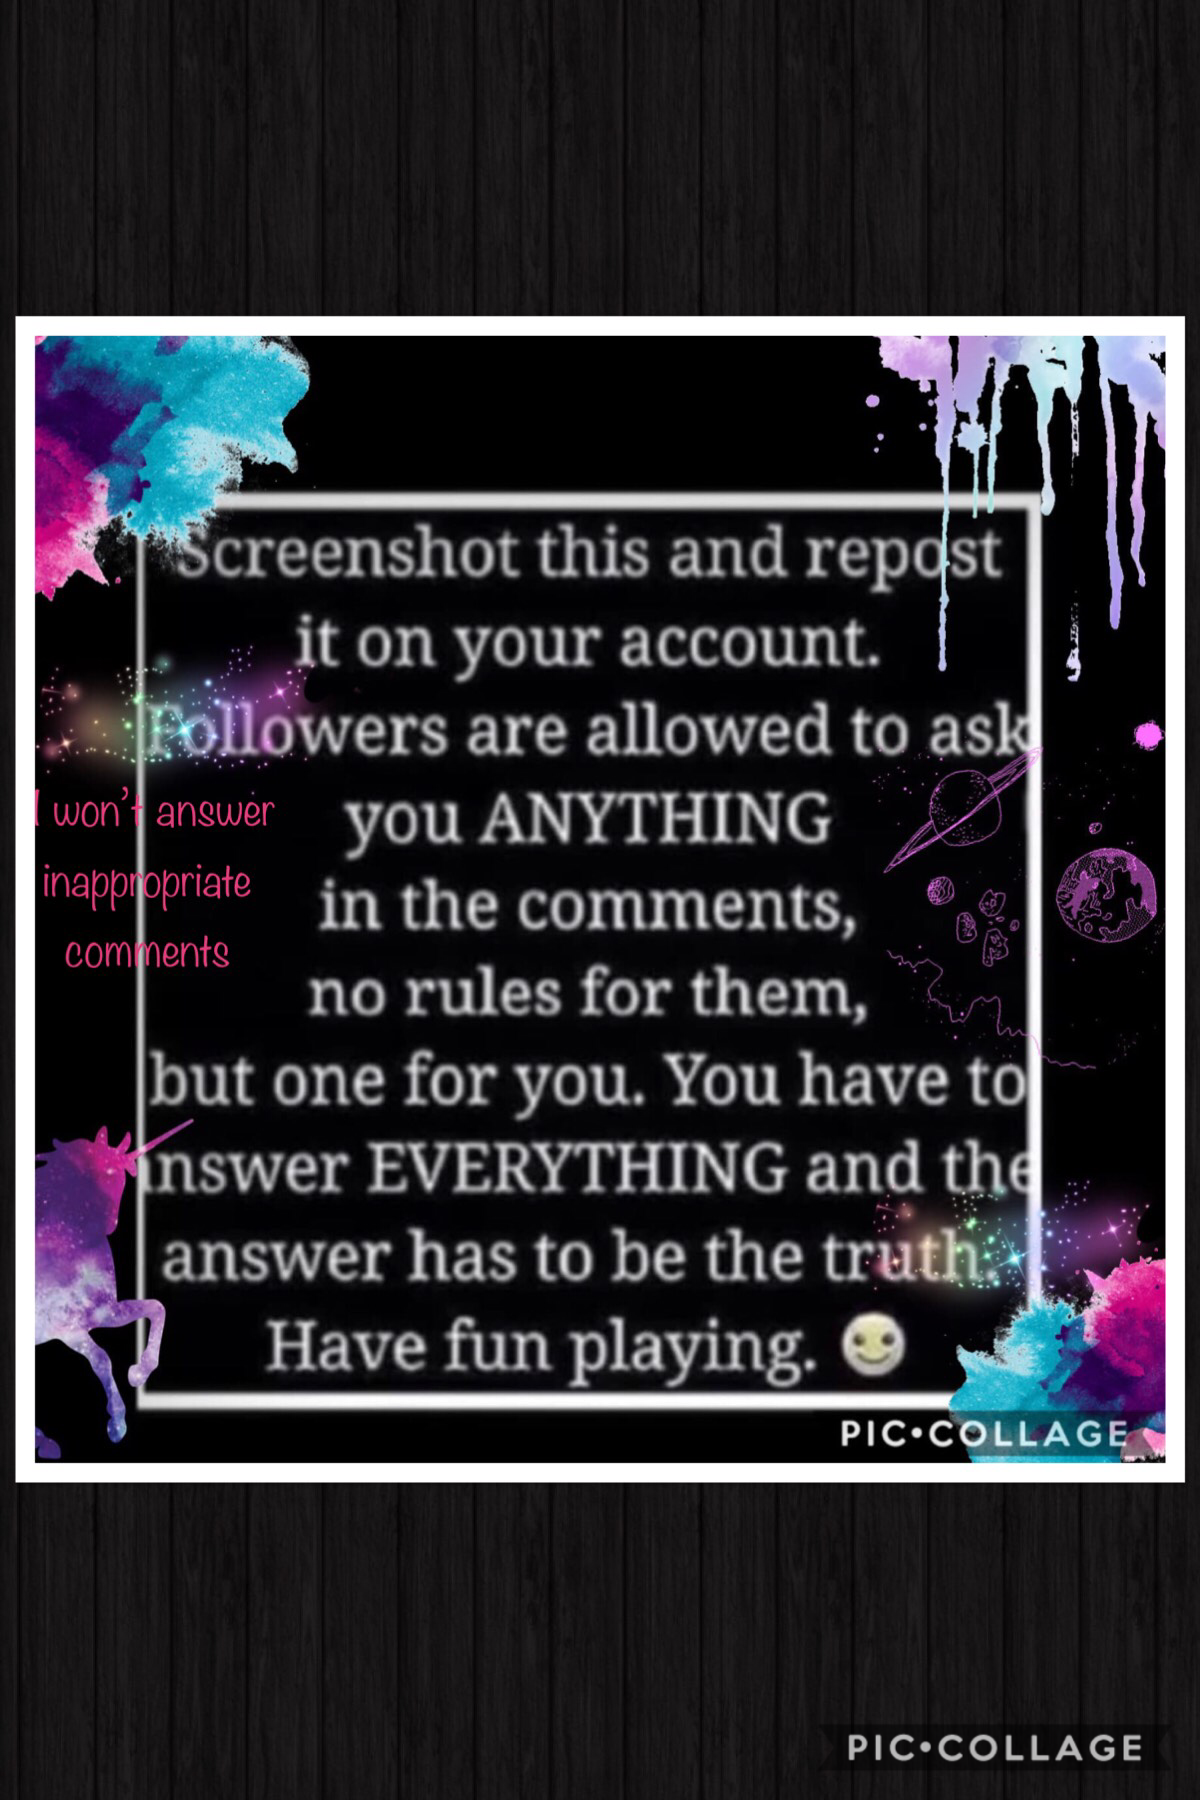 🦄💗Tap💗🦄
Hey guys! 😄Repost this, and ask me anything, as long as it’s appropriate. Love y’all, have a great night!❣️ (Or day lol)